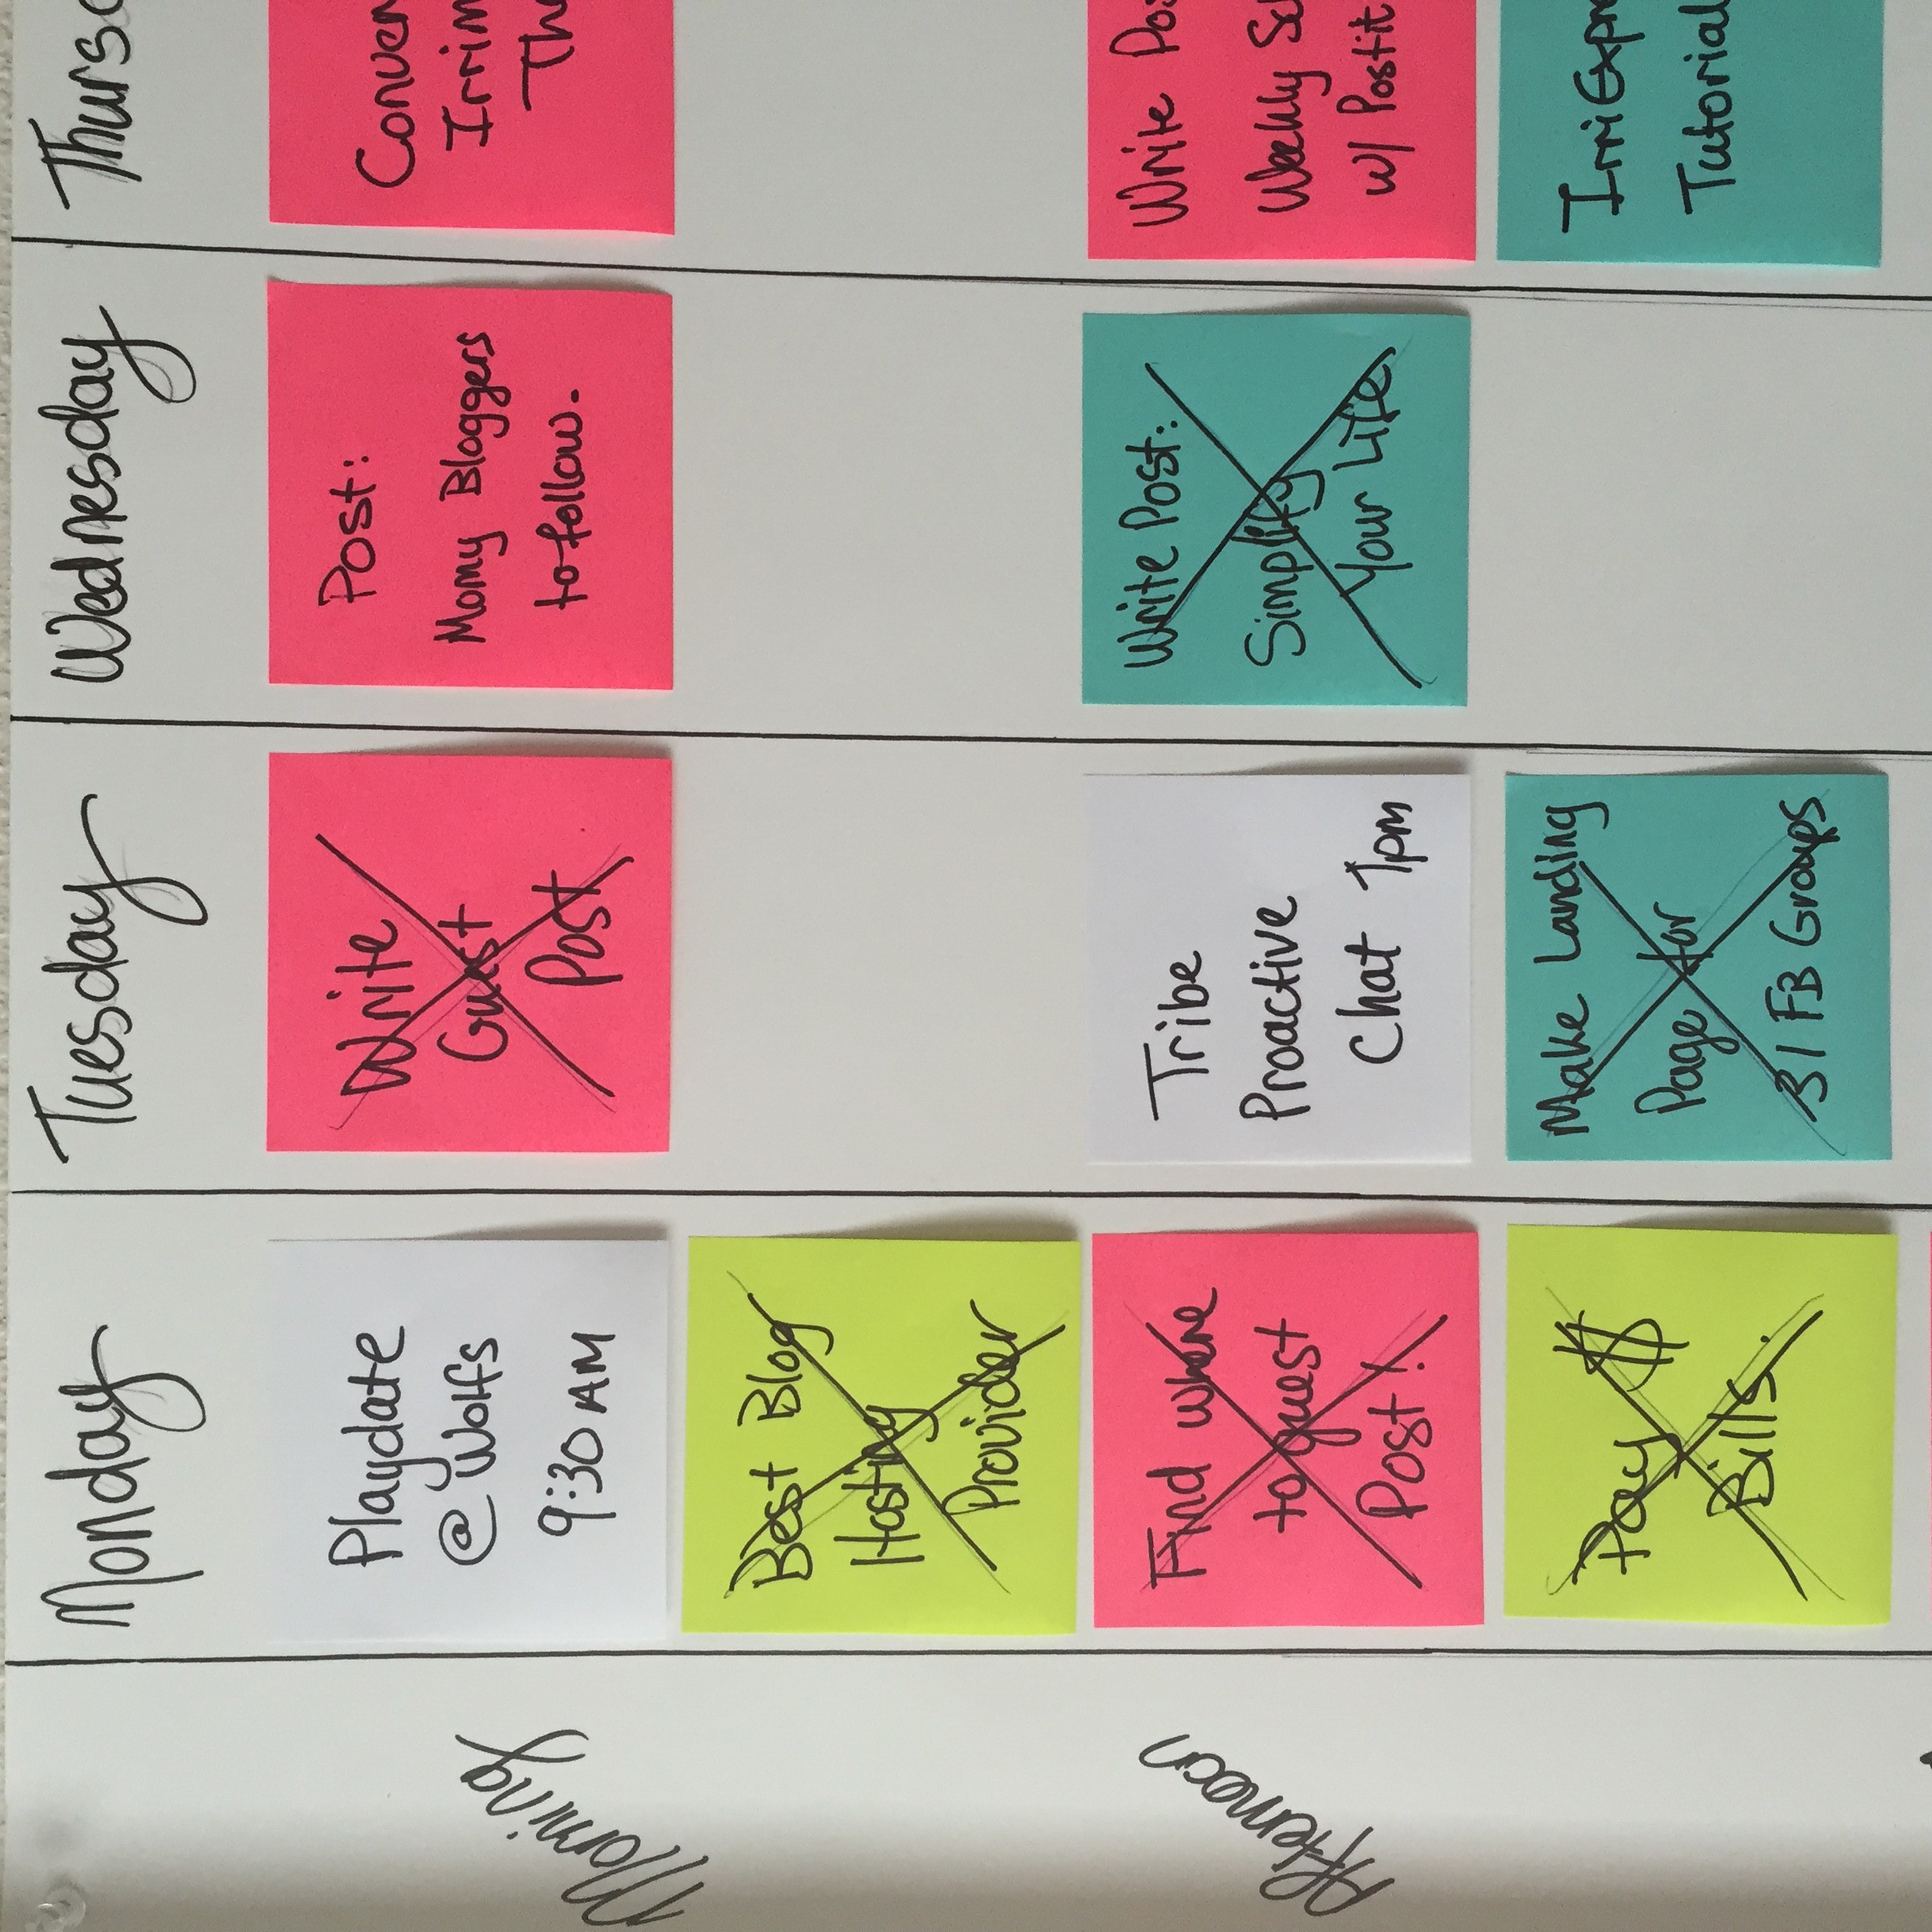 Super Simple Weekly Schedule to Get Stuff Done Post-it Notes Organize and Schedule my Life with Post it notes - Super Simple Hack! 7